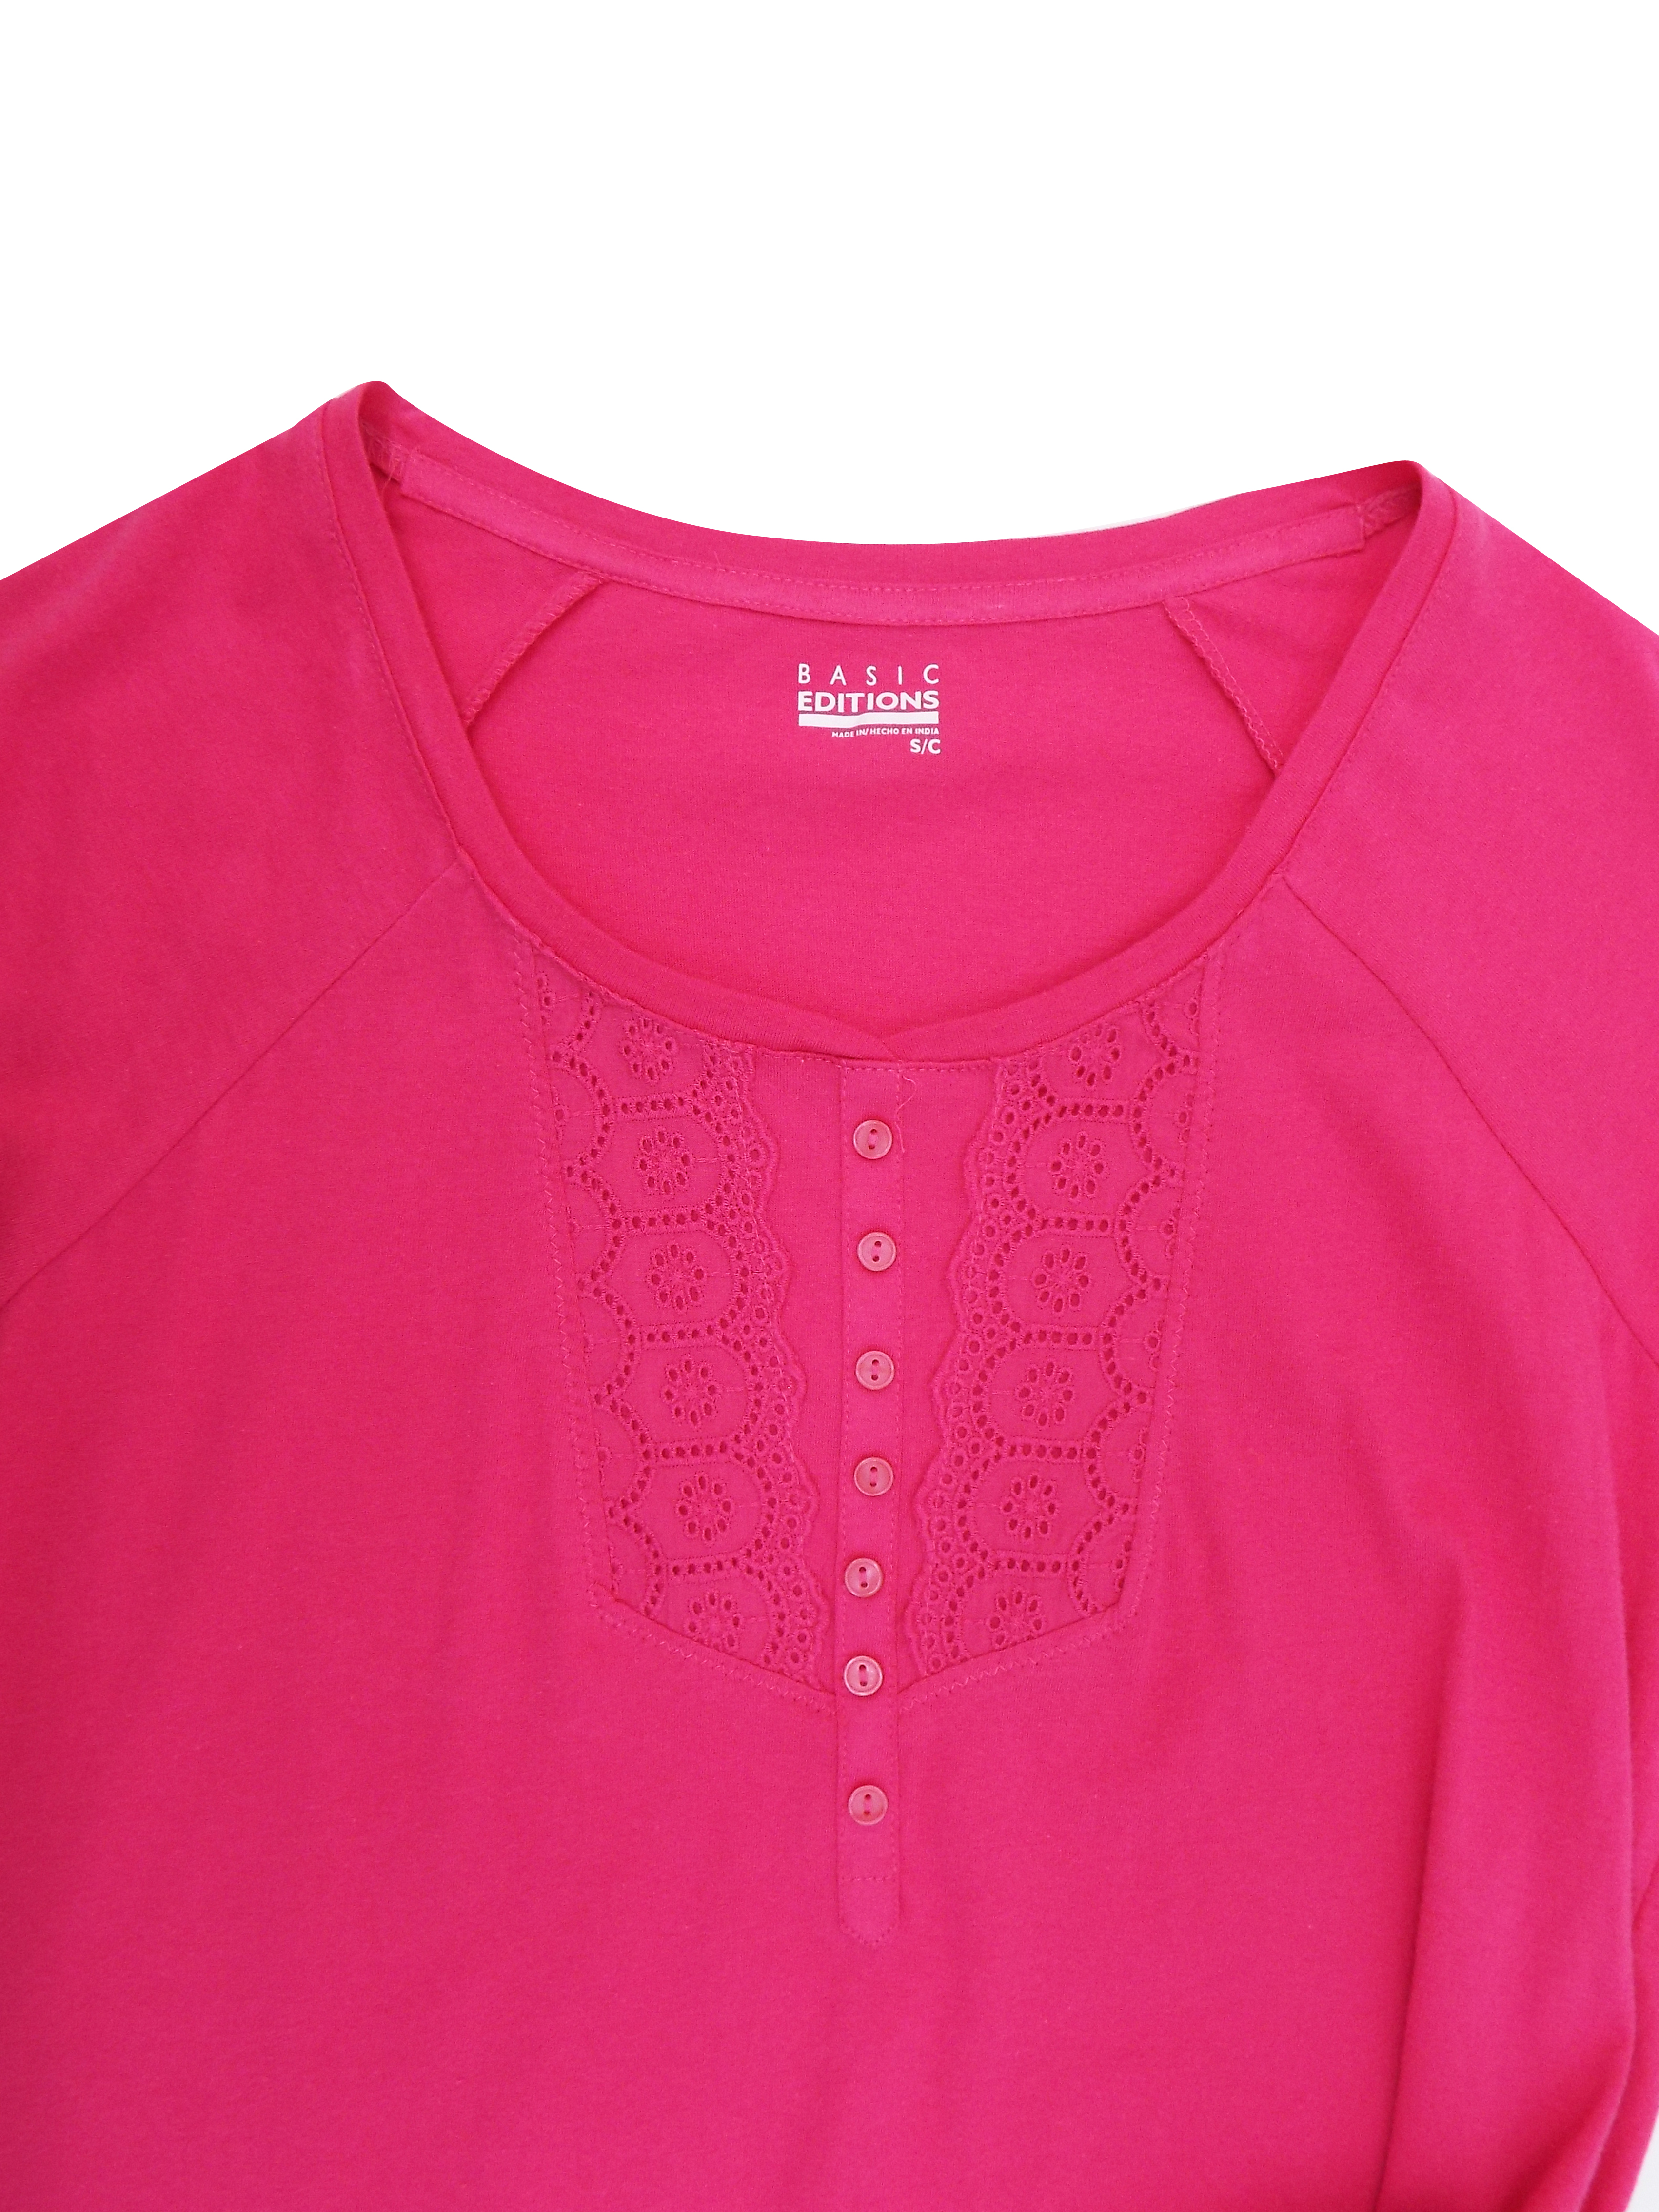 Plus Sizes Ladies Clothing by Basic Editions - - PINK Broderie Anglaise ...